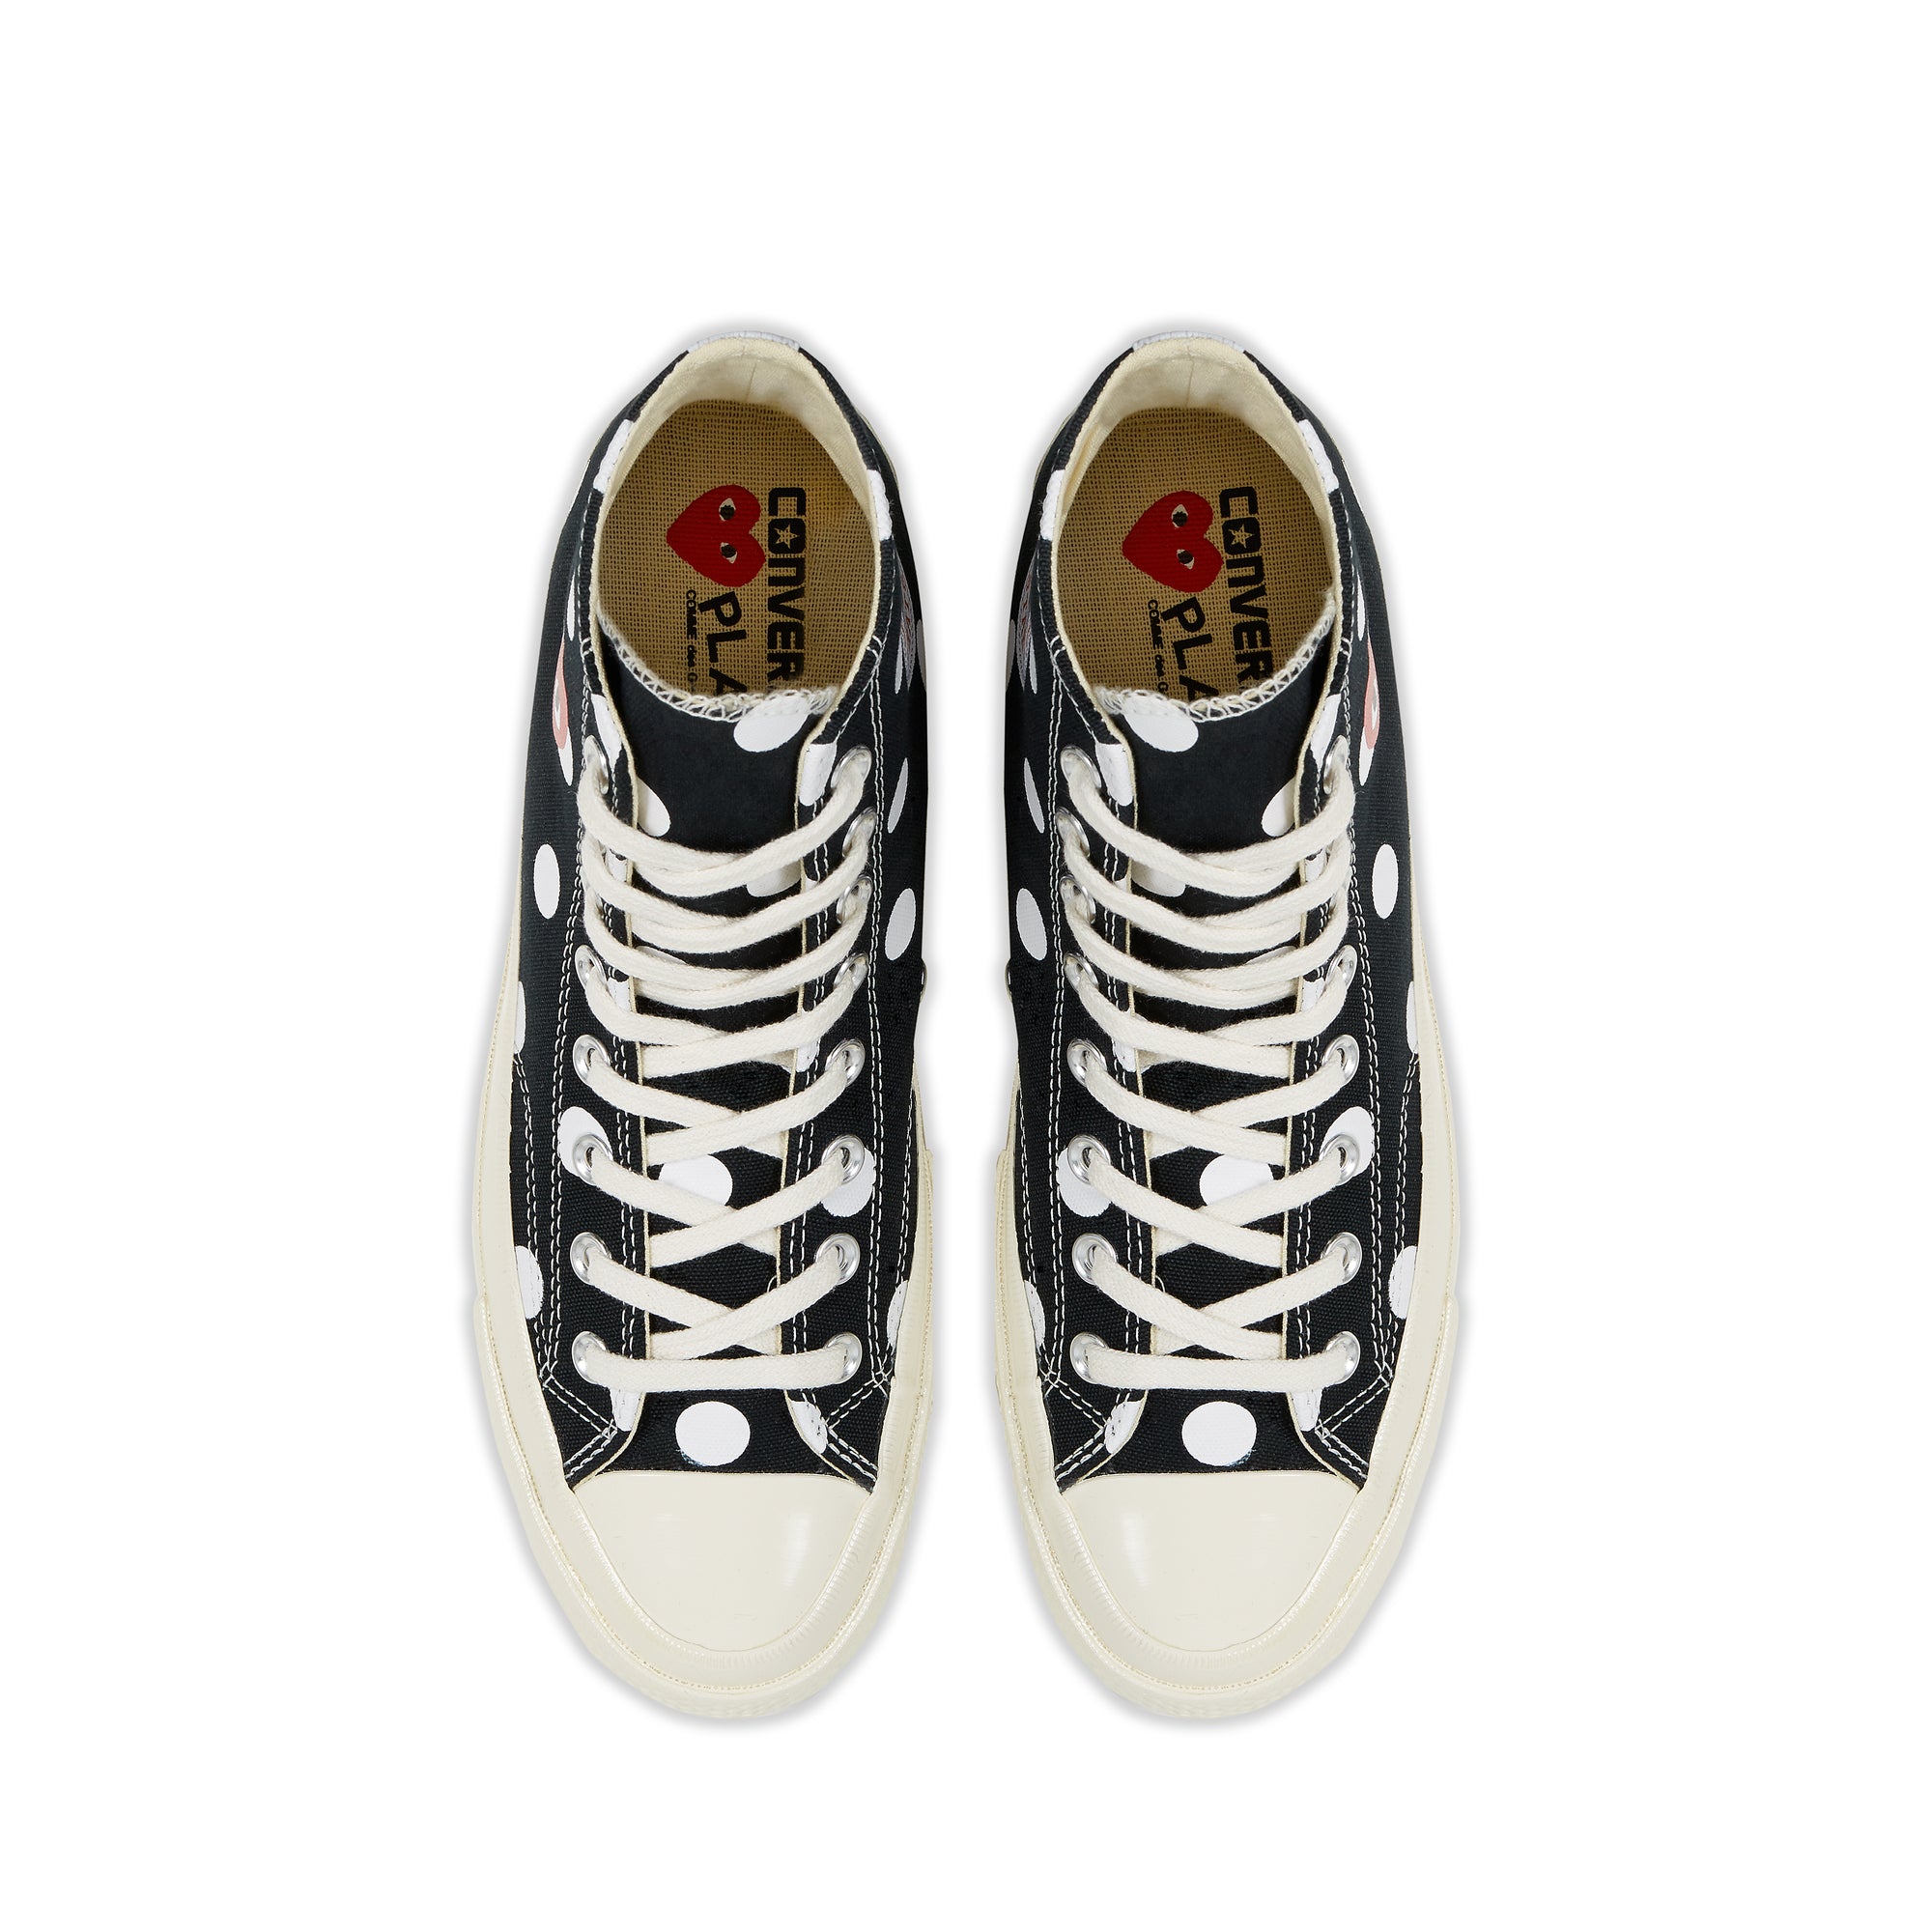 Play Converse - Polka Dot Red Heart Chuck Taylor All Star ’70 High Sneakers  - (Black)